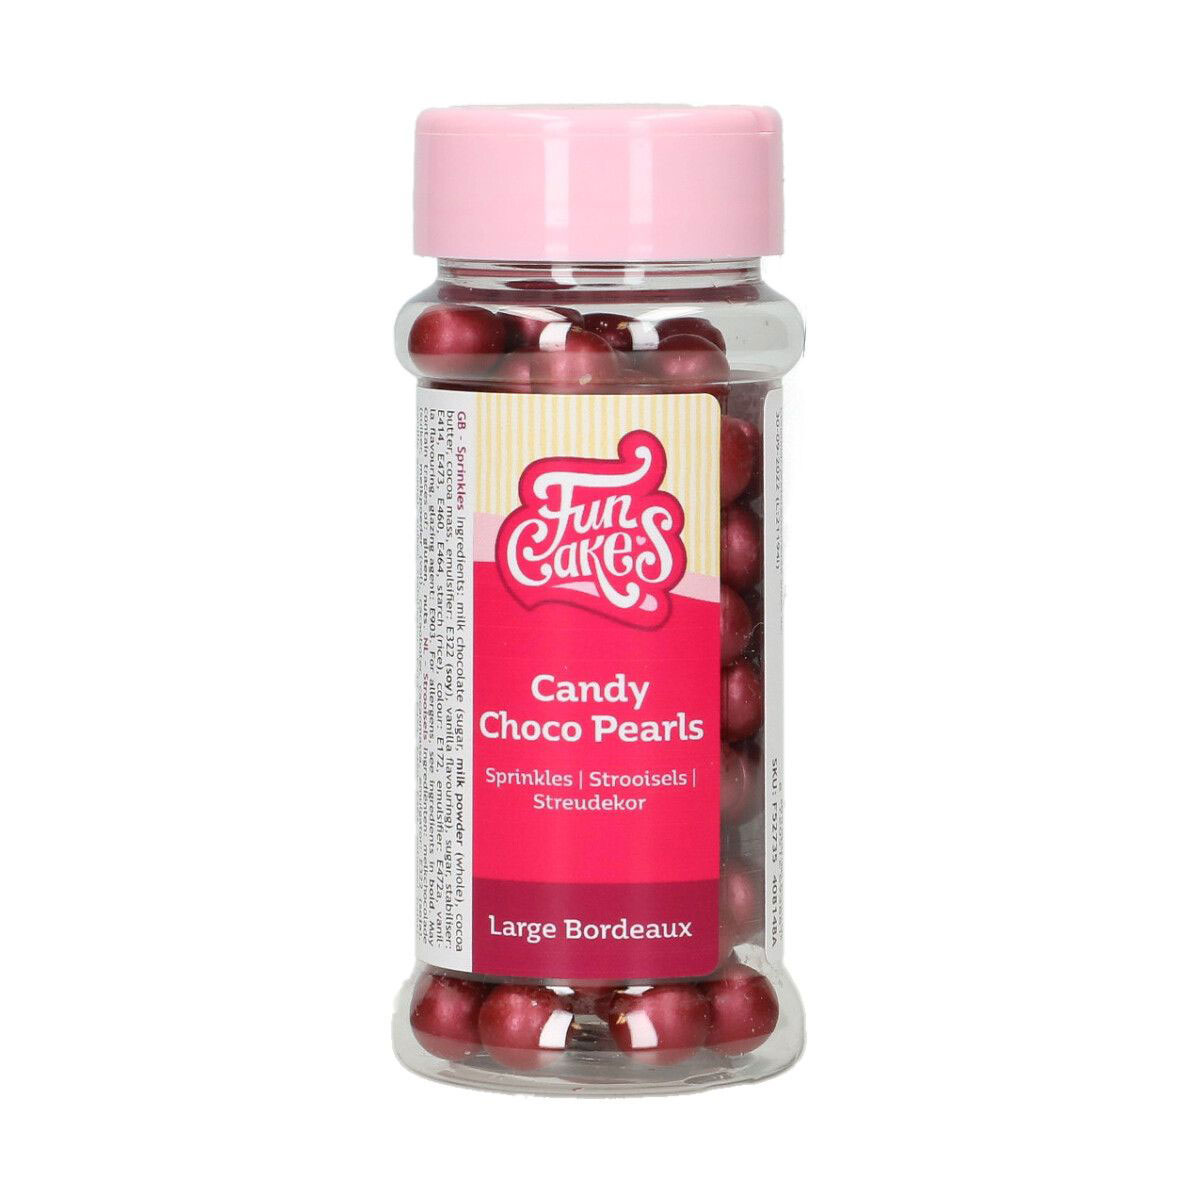 FunCakes Candy Choco Pearls Large Bordeaux 70g